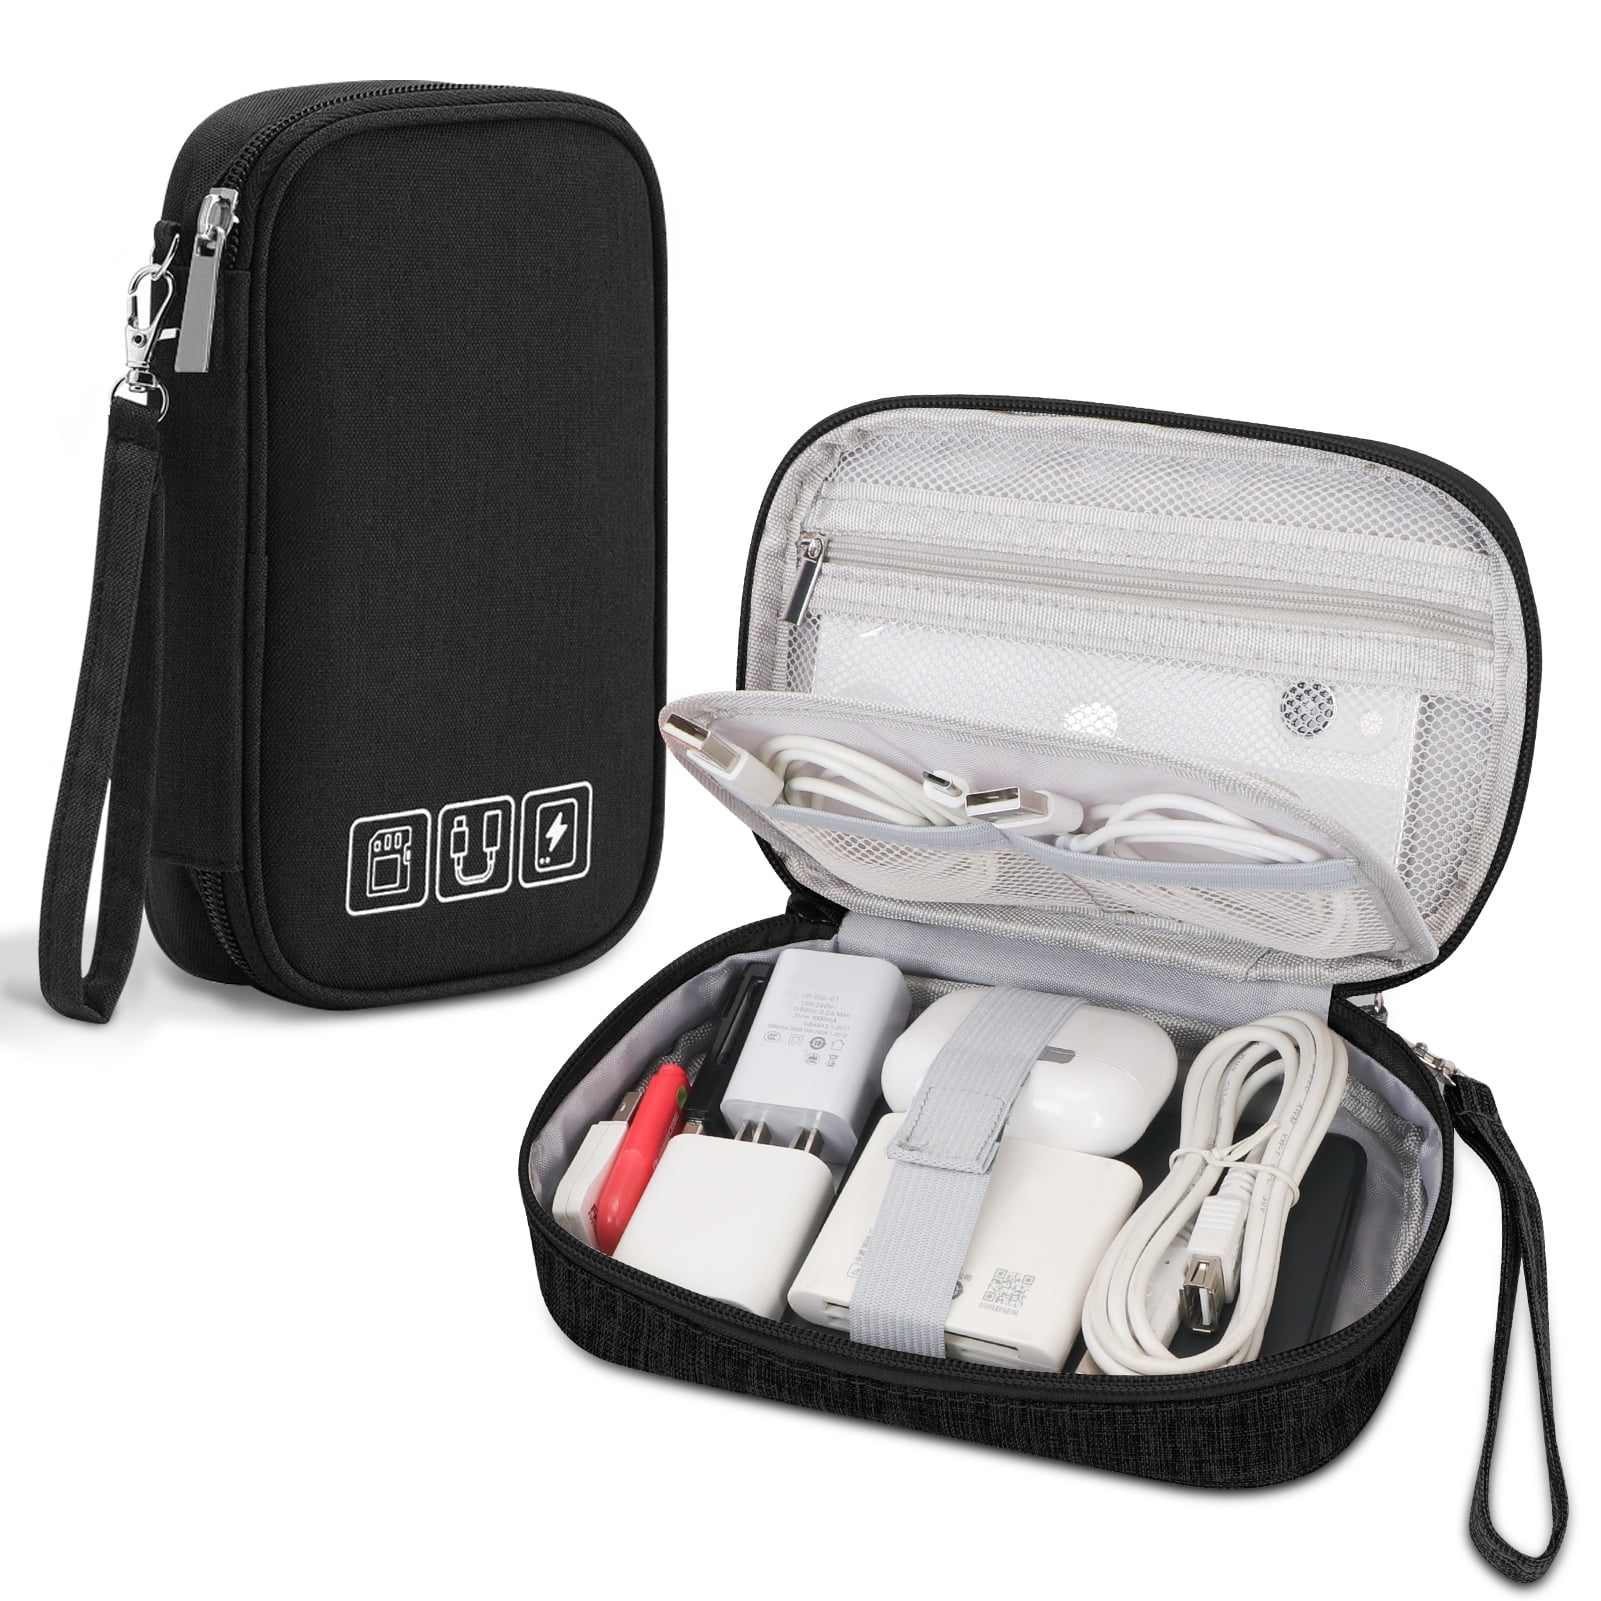 Portable Electronic Accessories Travel case,Cable Organizer Bag